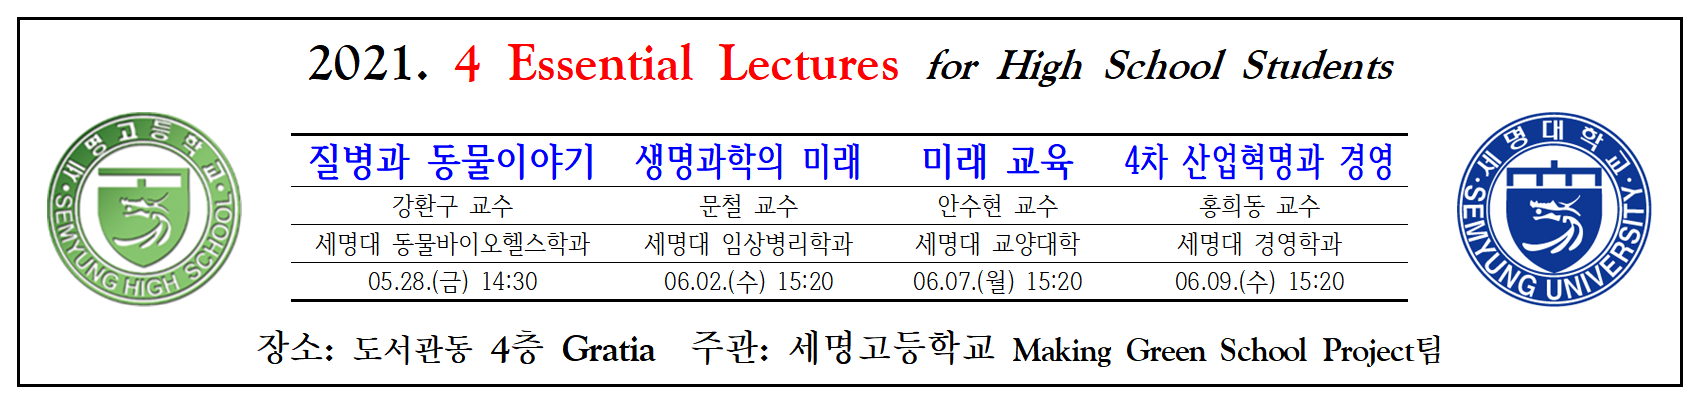 4 Essential Lectures(Pic).png